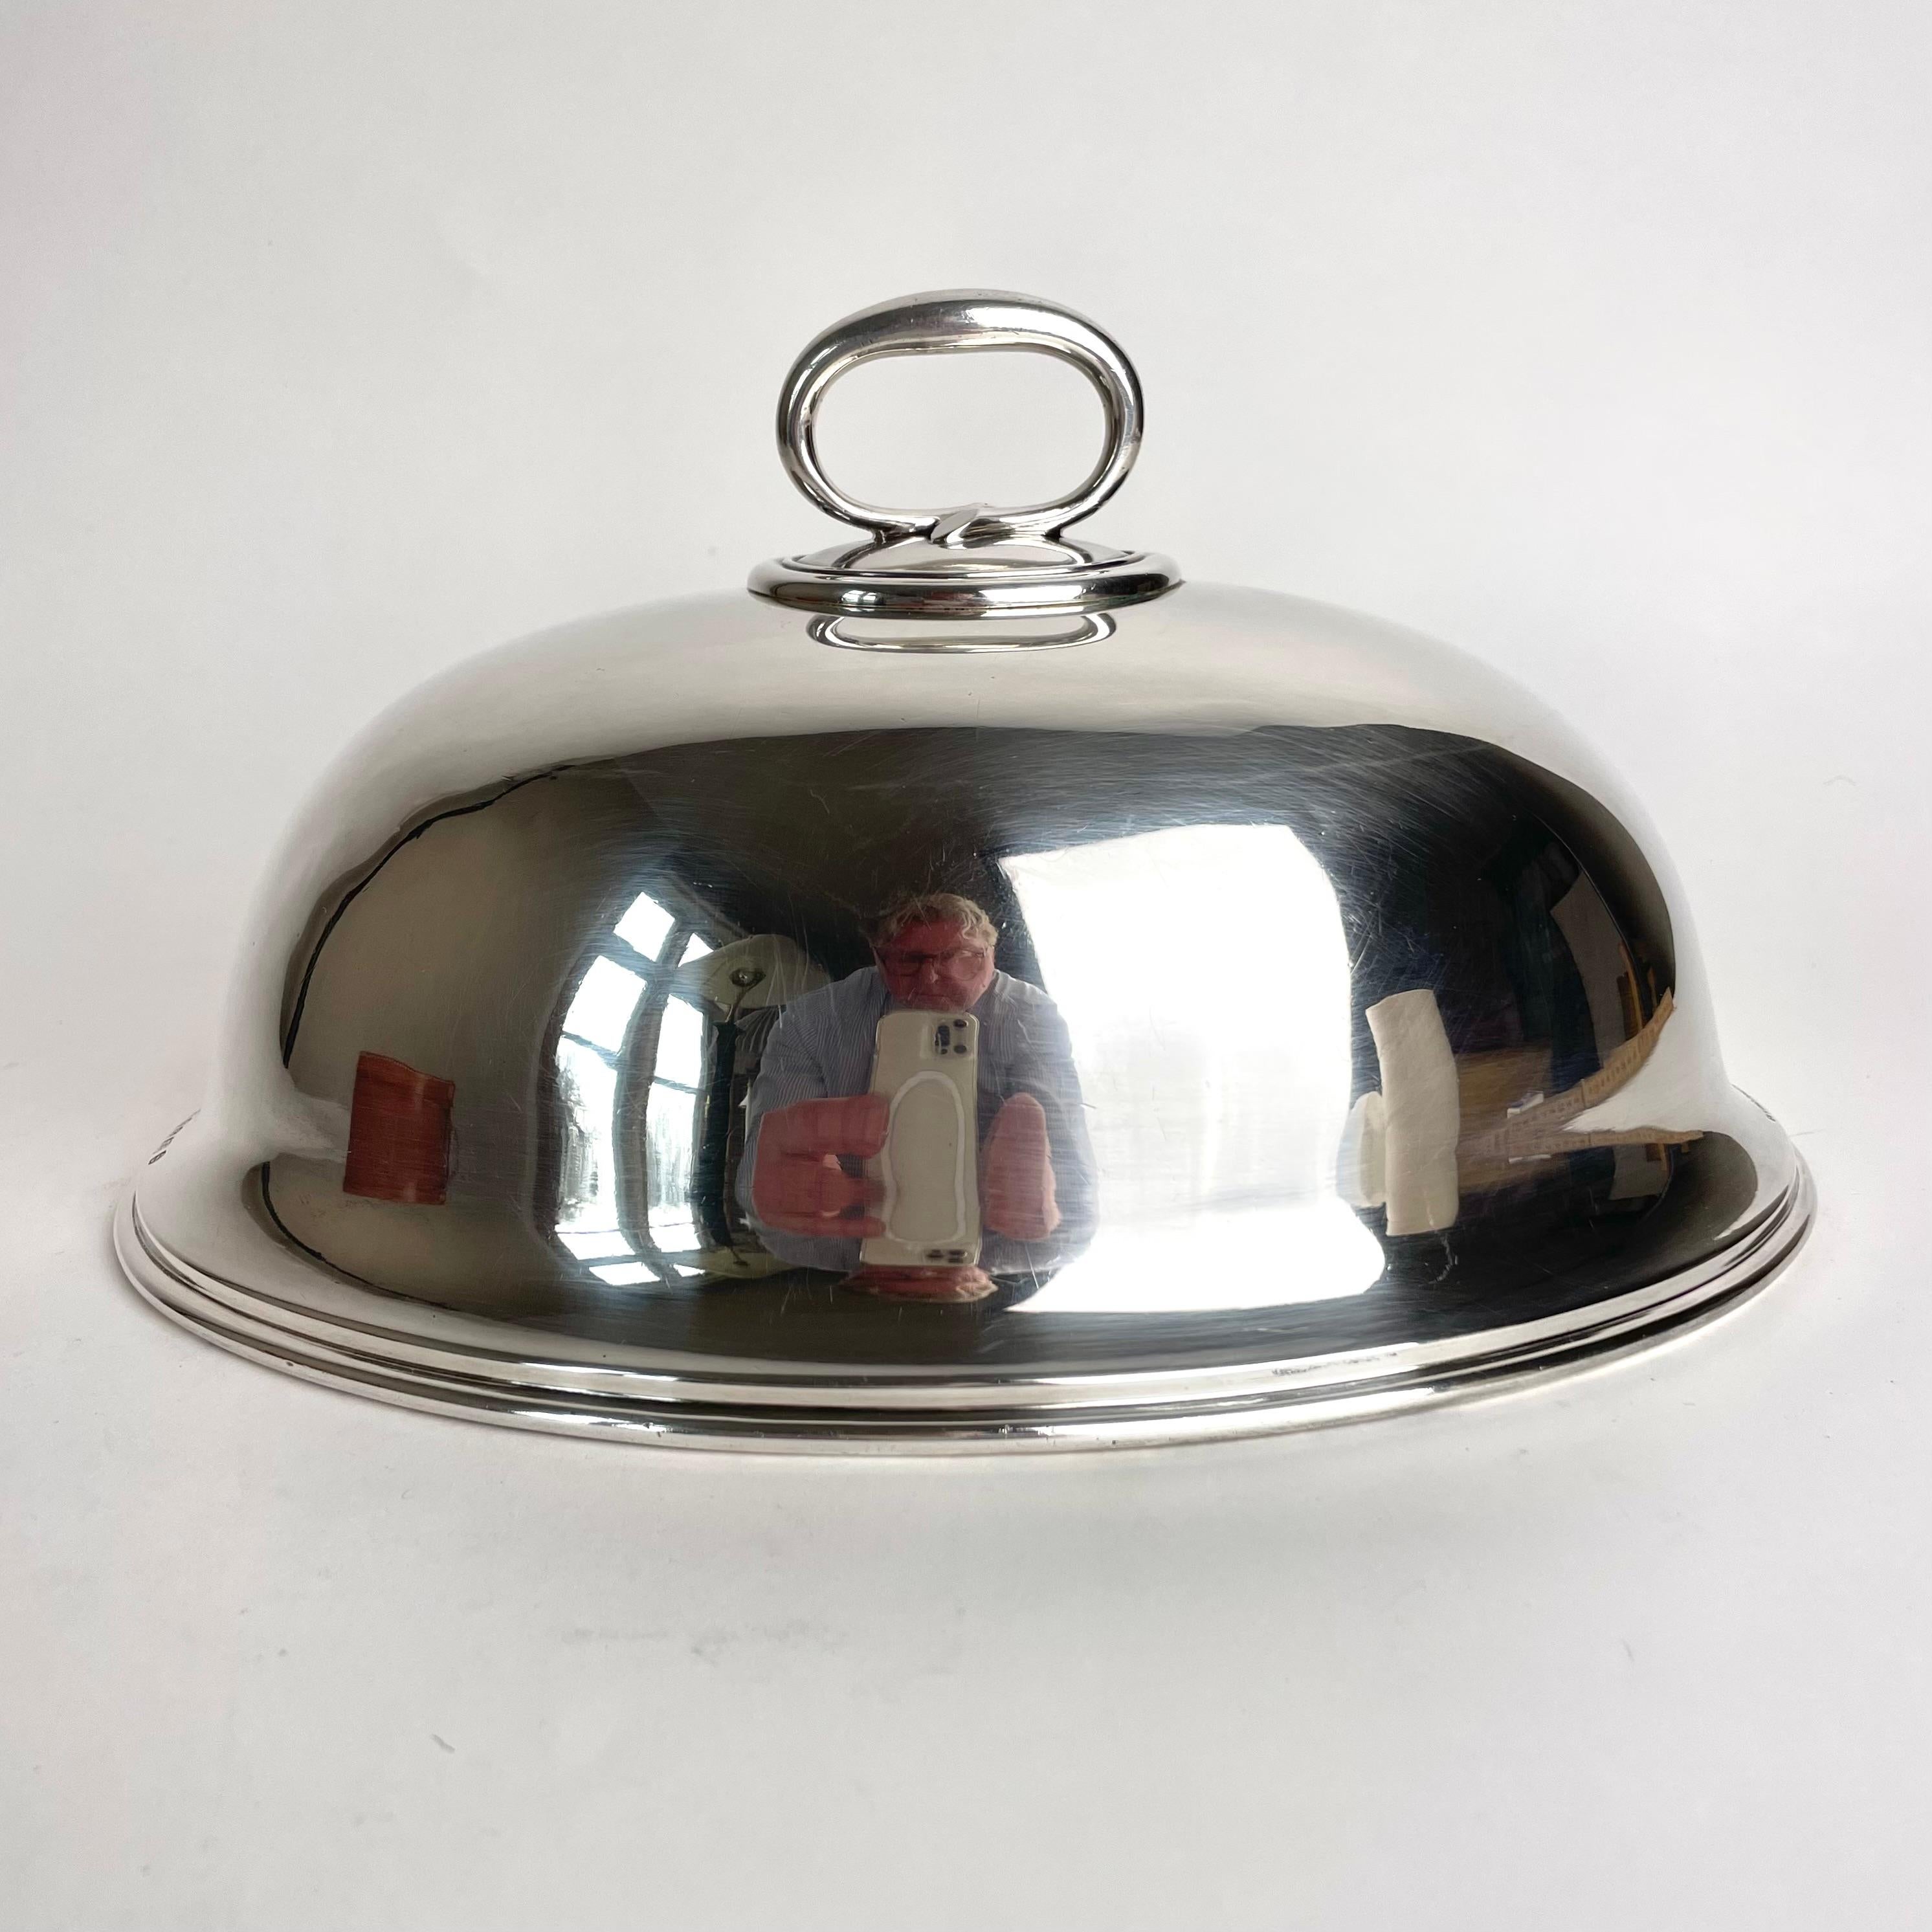 Beautiful silver plated Food Cover Dome by Elkington & Co (Birmingham, England) from 1904. Simple and elegant design with removable handle.

Wear consistent with age and use.